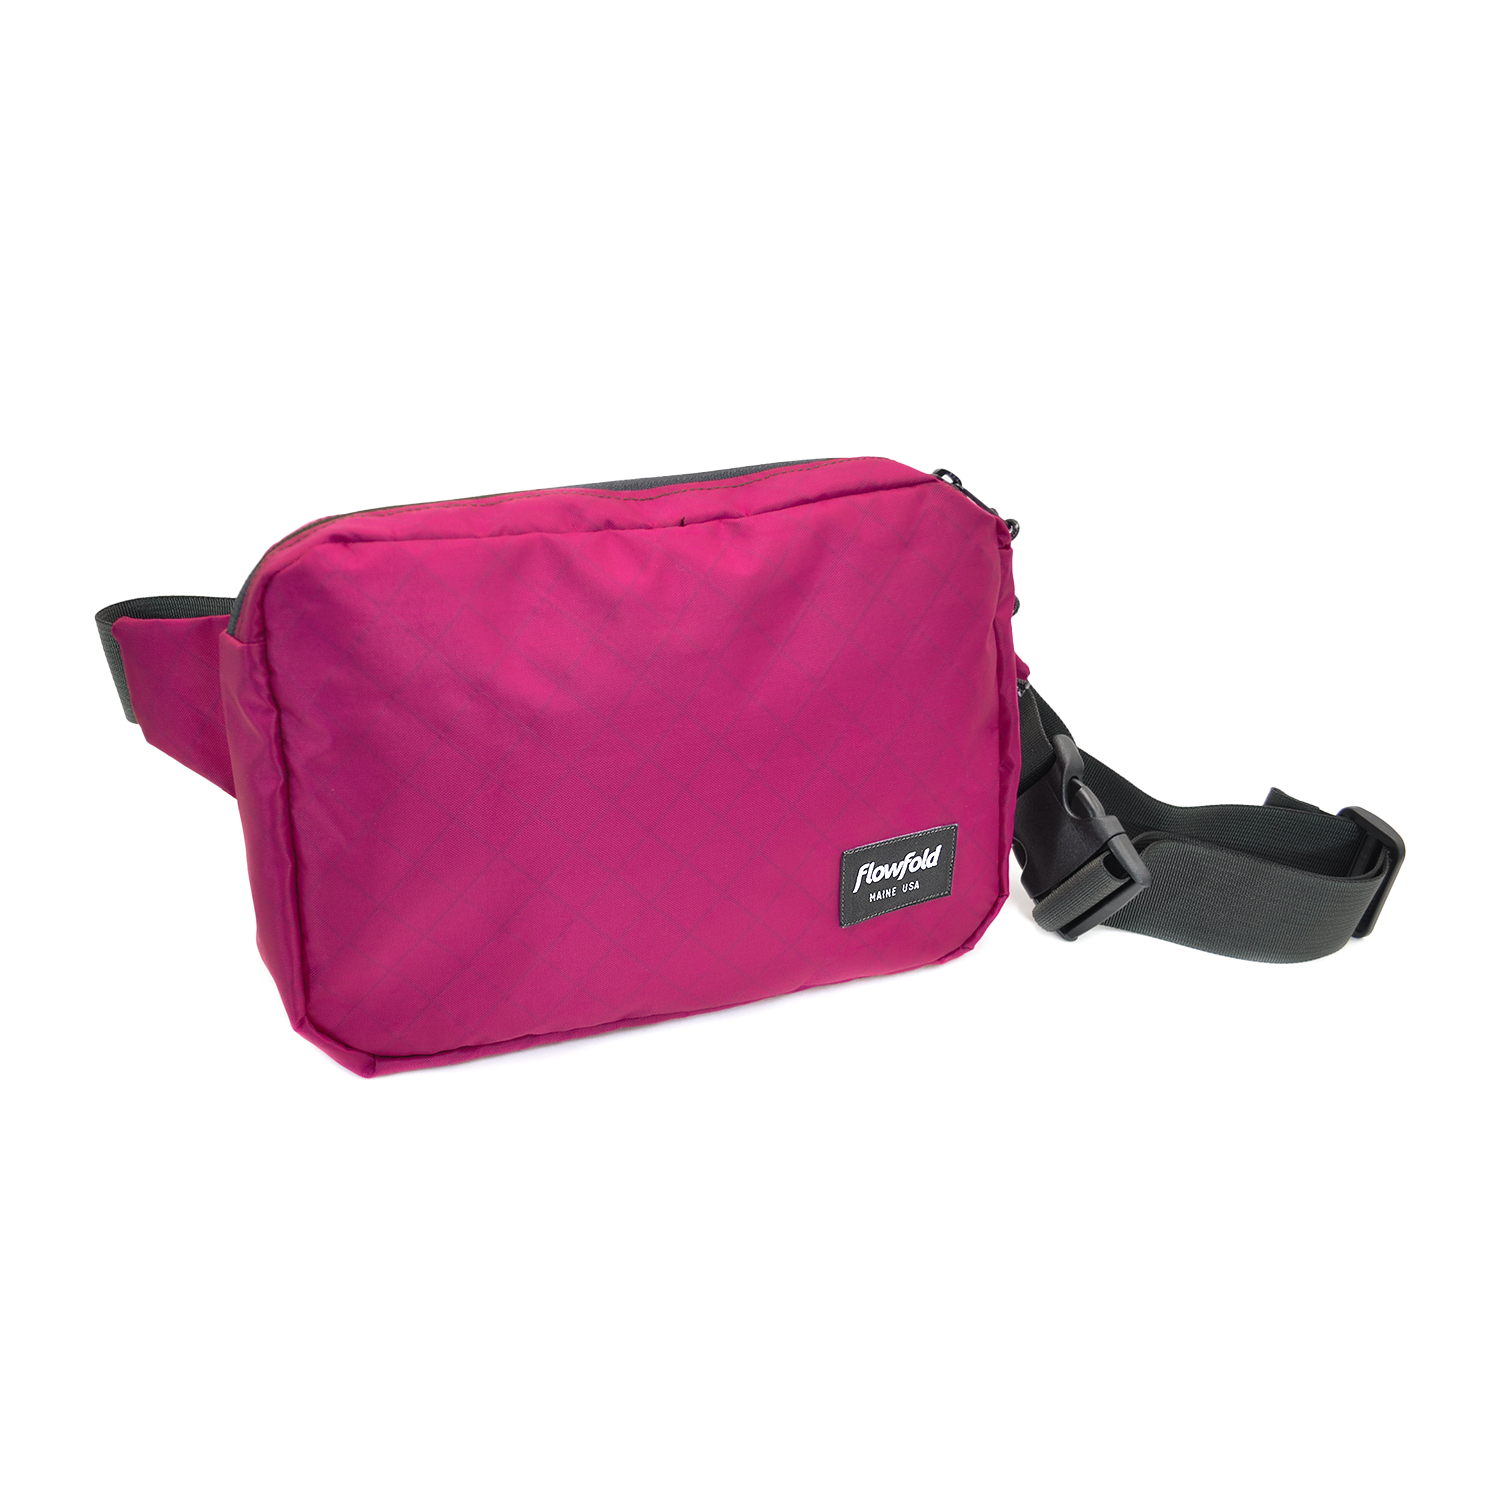 Flowfold Explorer Fanny Pack - Made in USA Large Fanny Pack, EcoPak: Recycled Heather Grey / Small